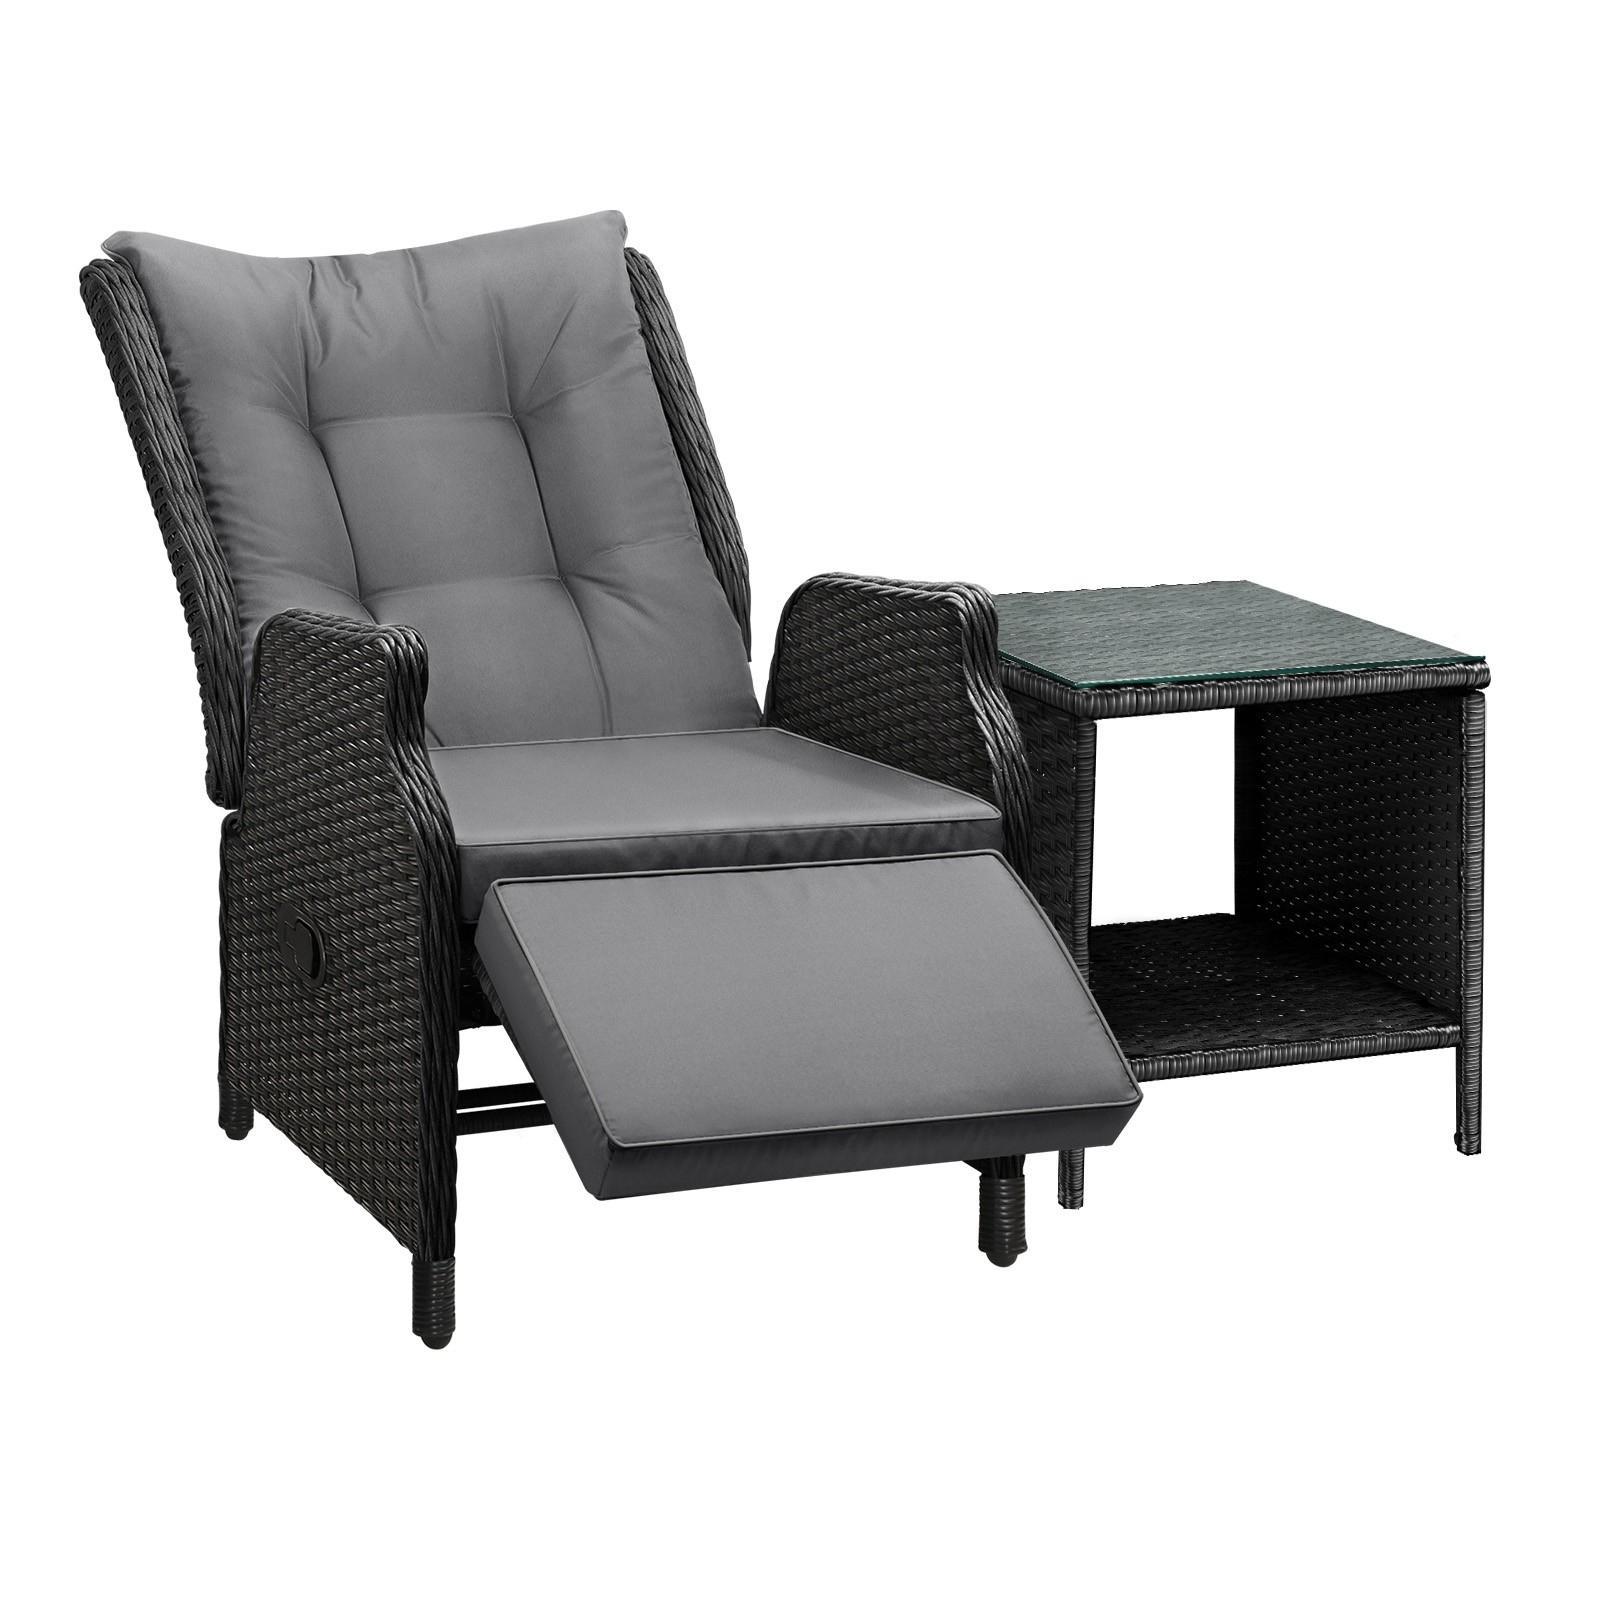 Livsip Recliner Chairs Sun lounge Table Set of 2